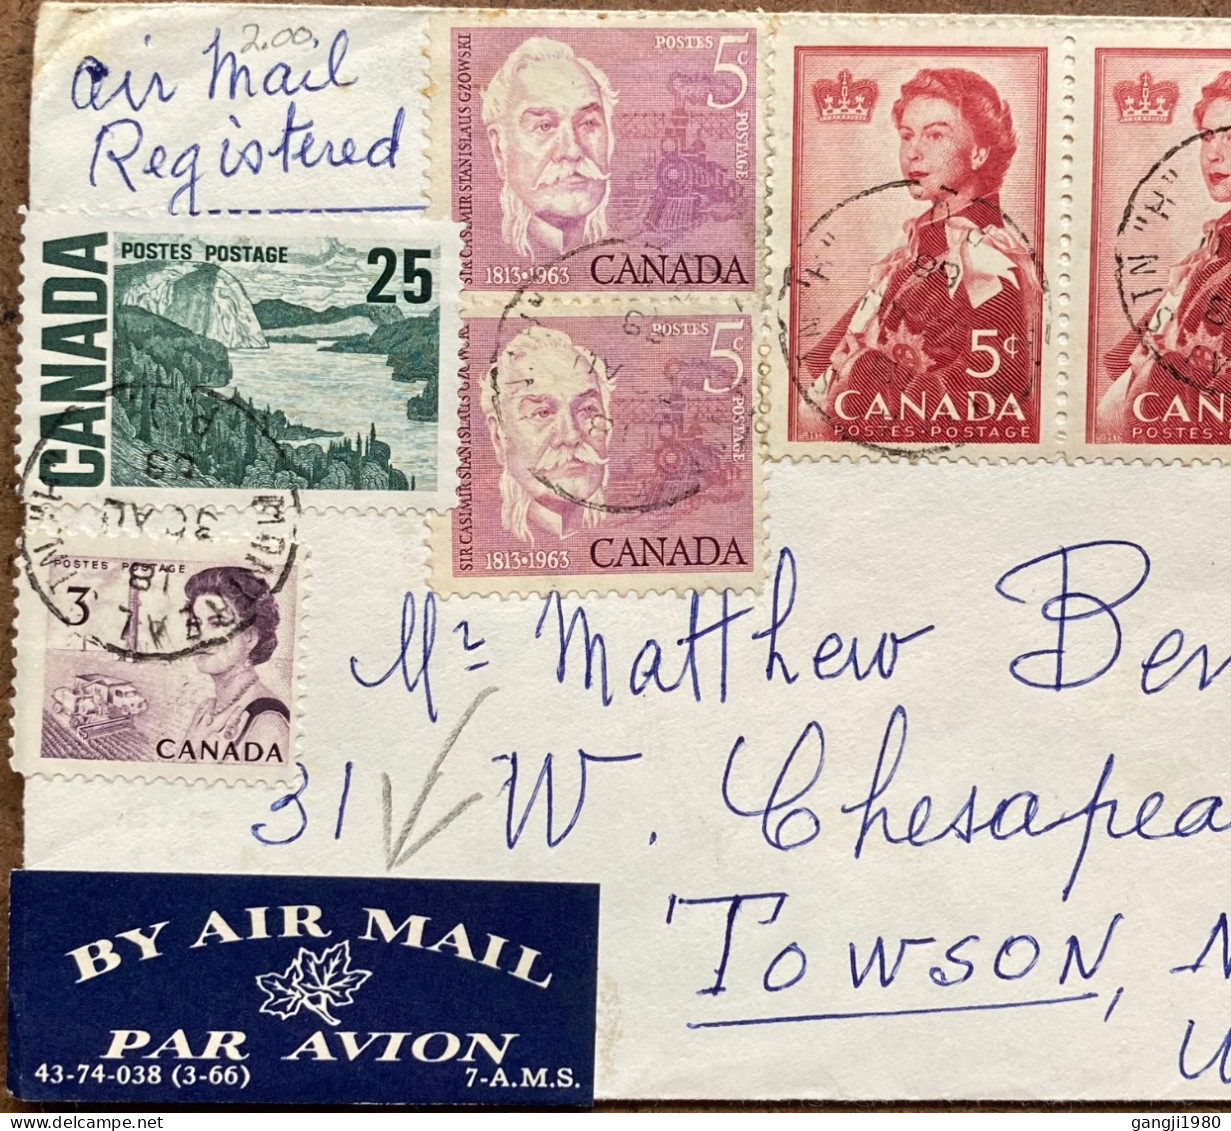 CANADA -1968, REGISTER, AIRMAIL, COVER USED TO USA, MULTI 8 STAMP, CASIMIR GZOWOSKT, RAILWAY, ROYAL QUEEN ELIZABETH, MON - Covers & Documents